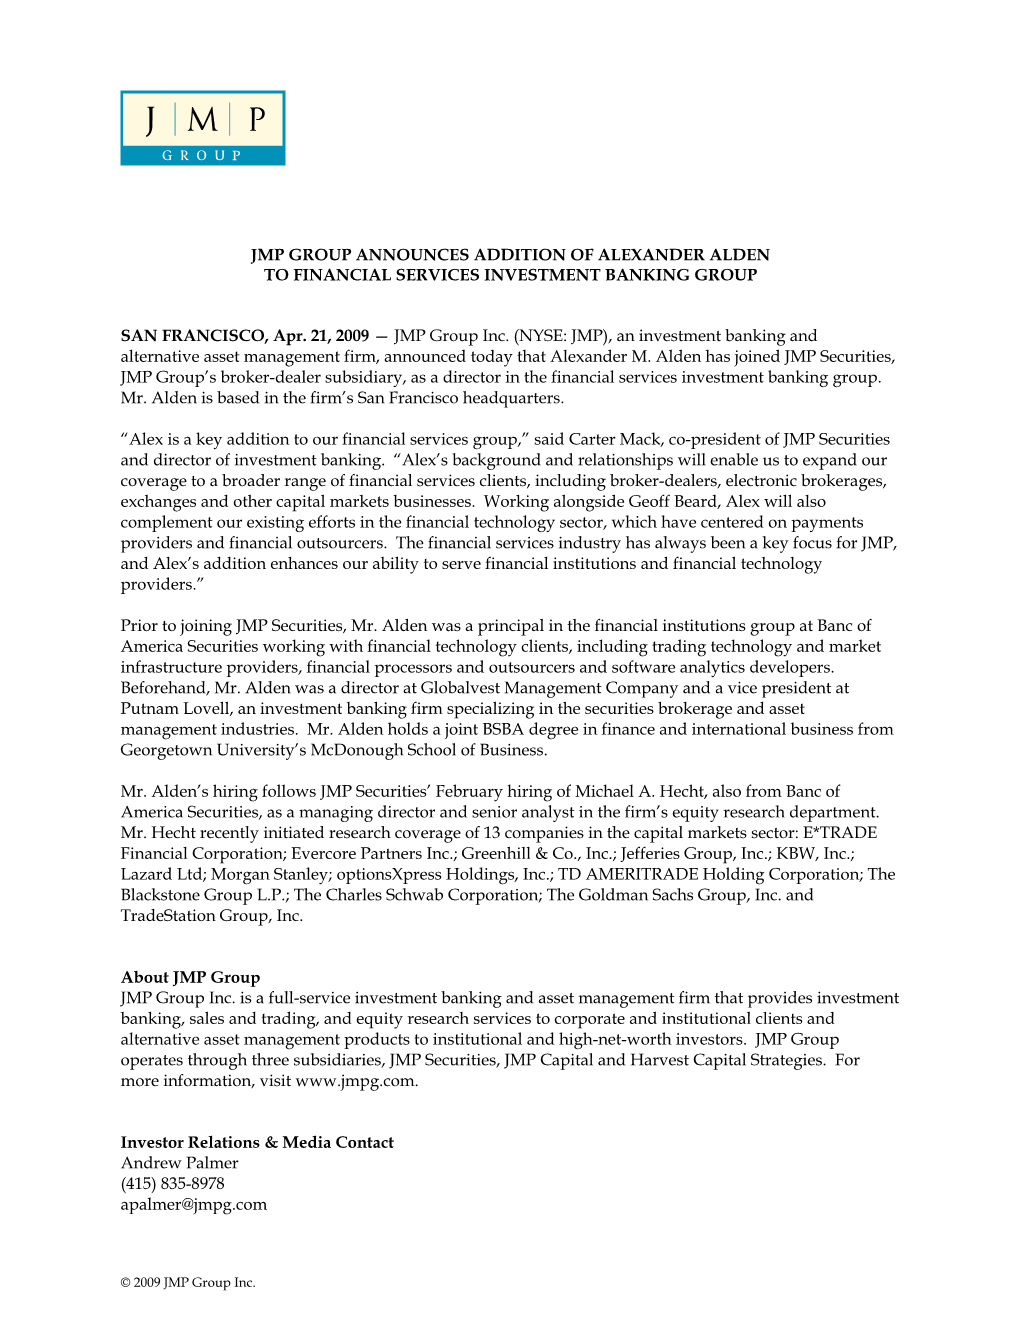 Jmp Group Announces Addition of Alexander Alden to Financial Services Investment Banking Group